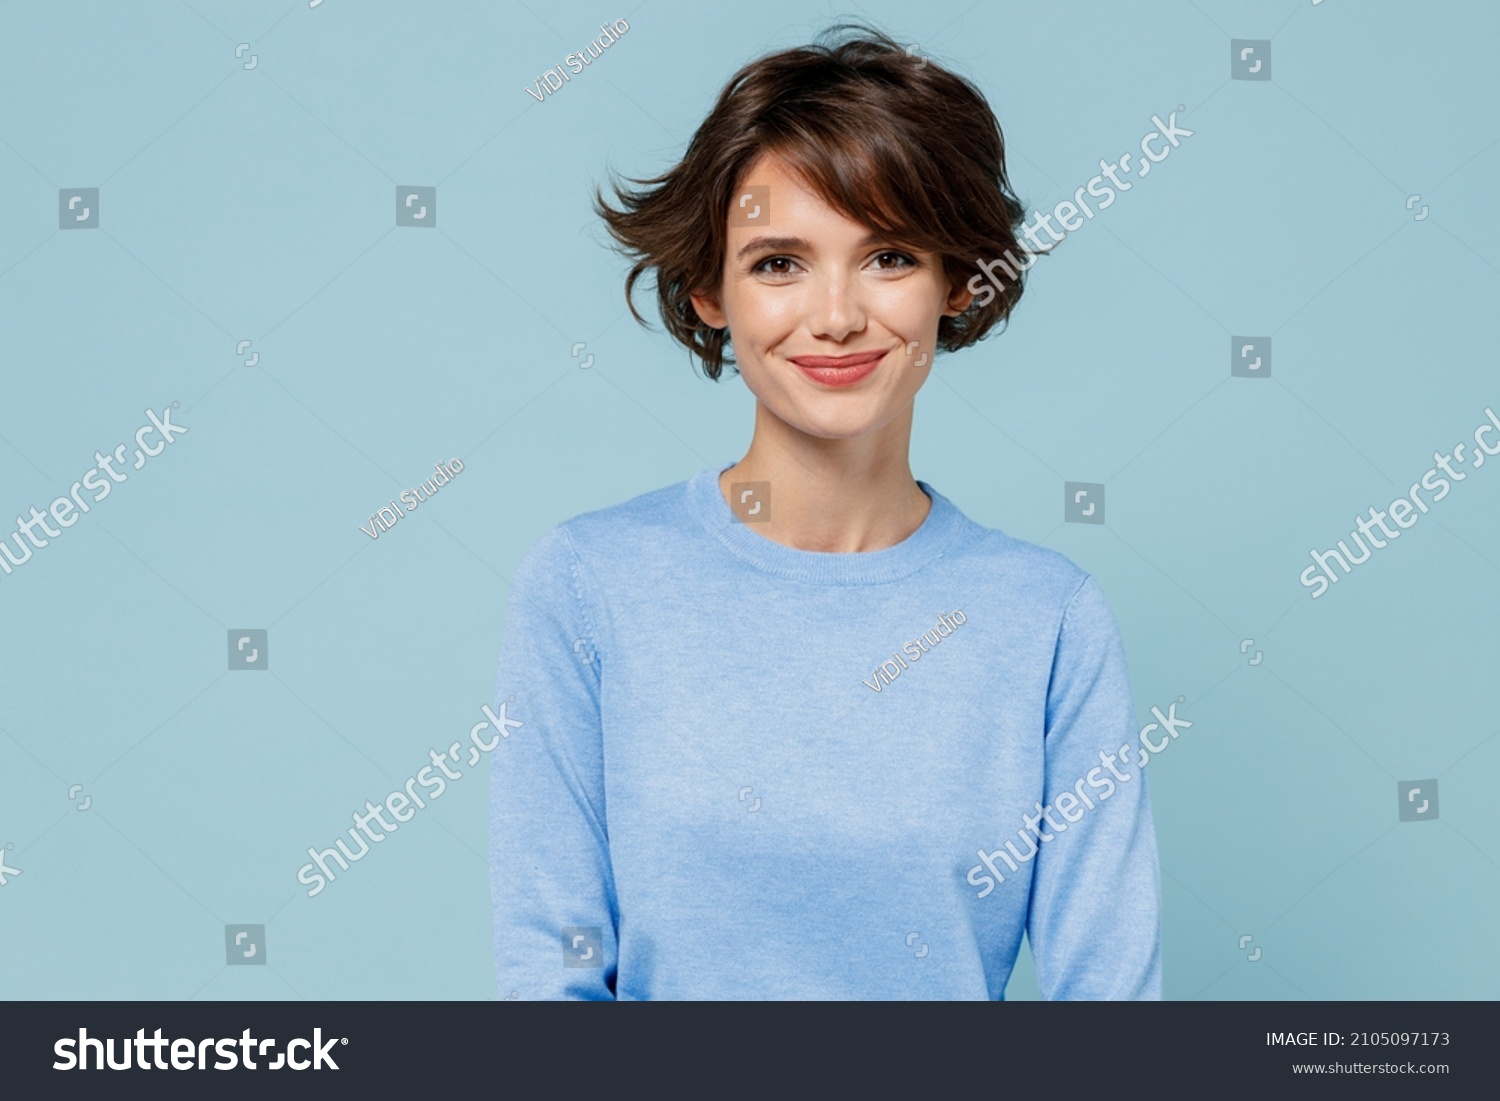 Young smiling fun happy caucasian european attractive cute woman 20s in casual sweater looking camera isolated on plain pastel light blue color background studio portrait. People lifestyle concept. #2105097173